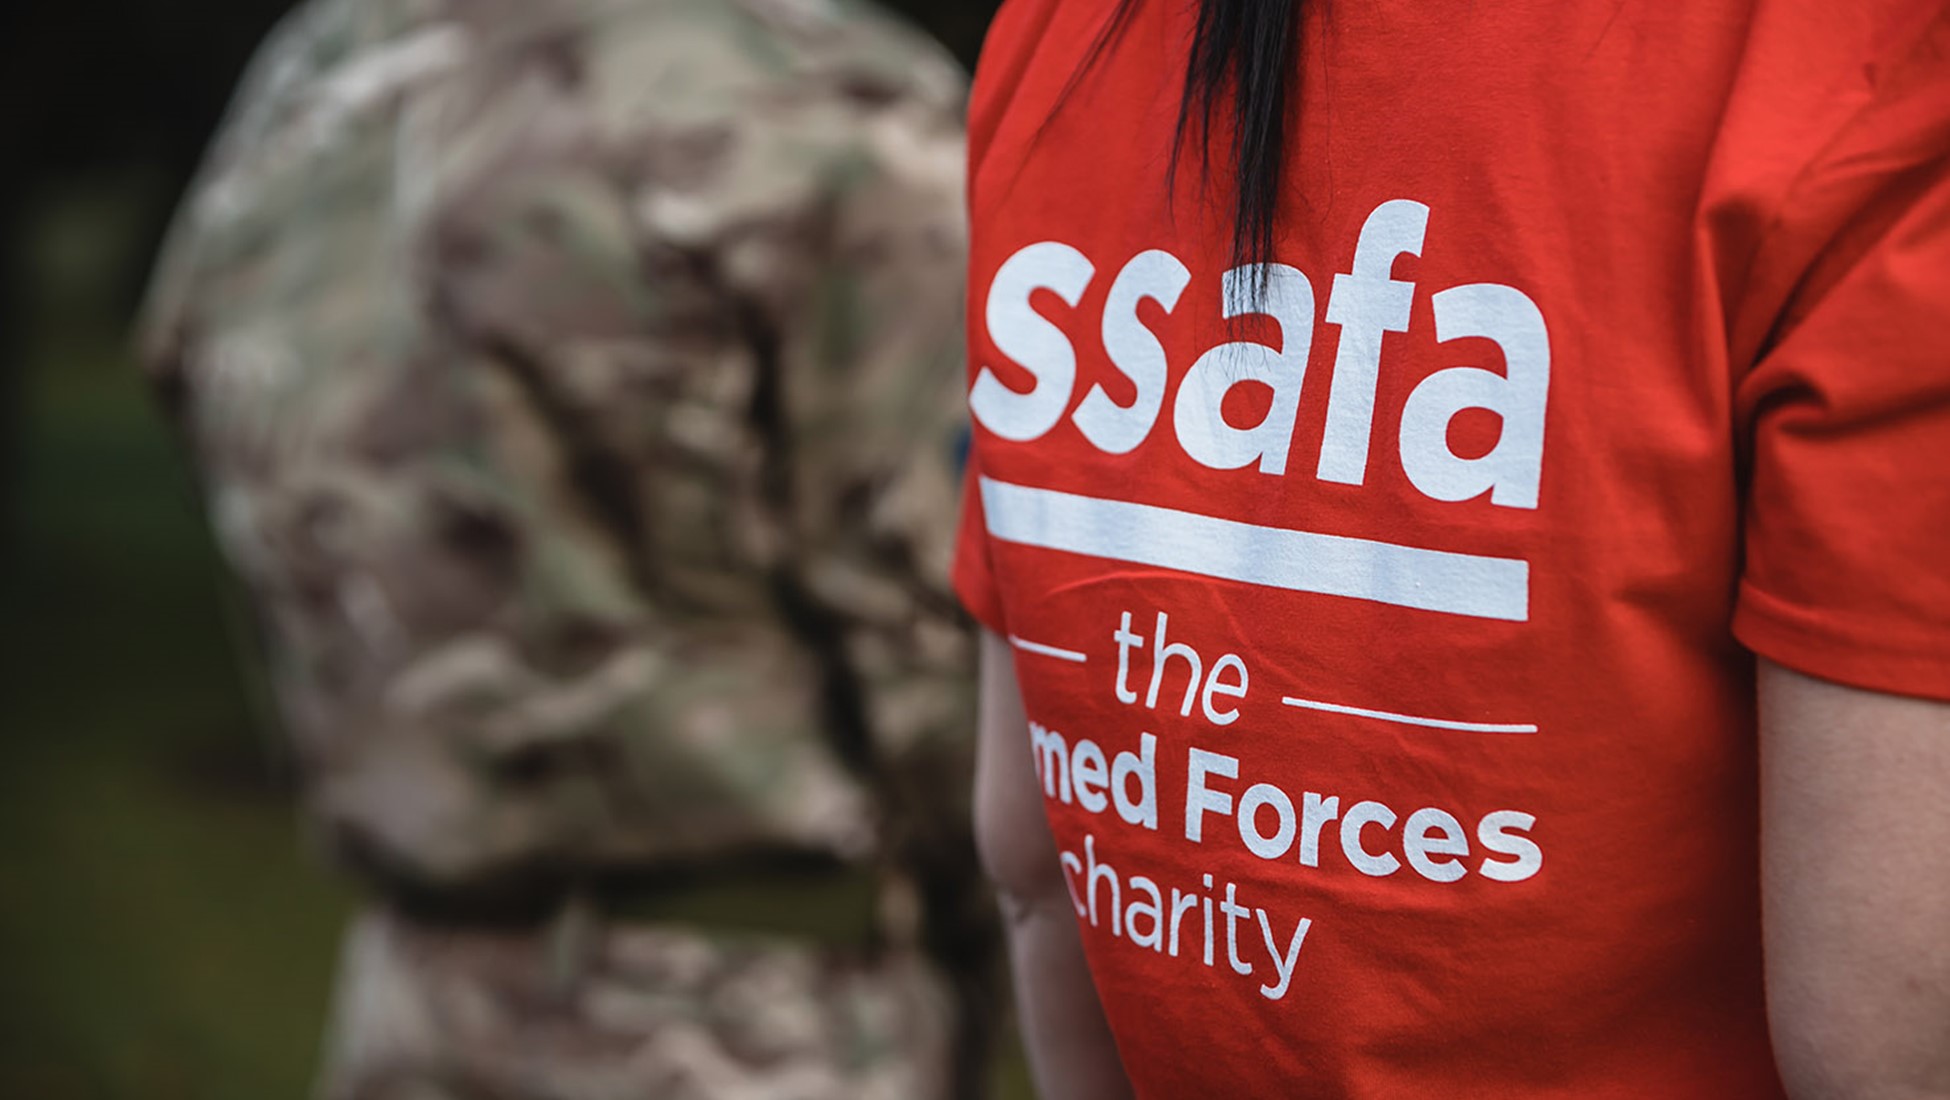 SSAFA – The Armed Forces Charity